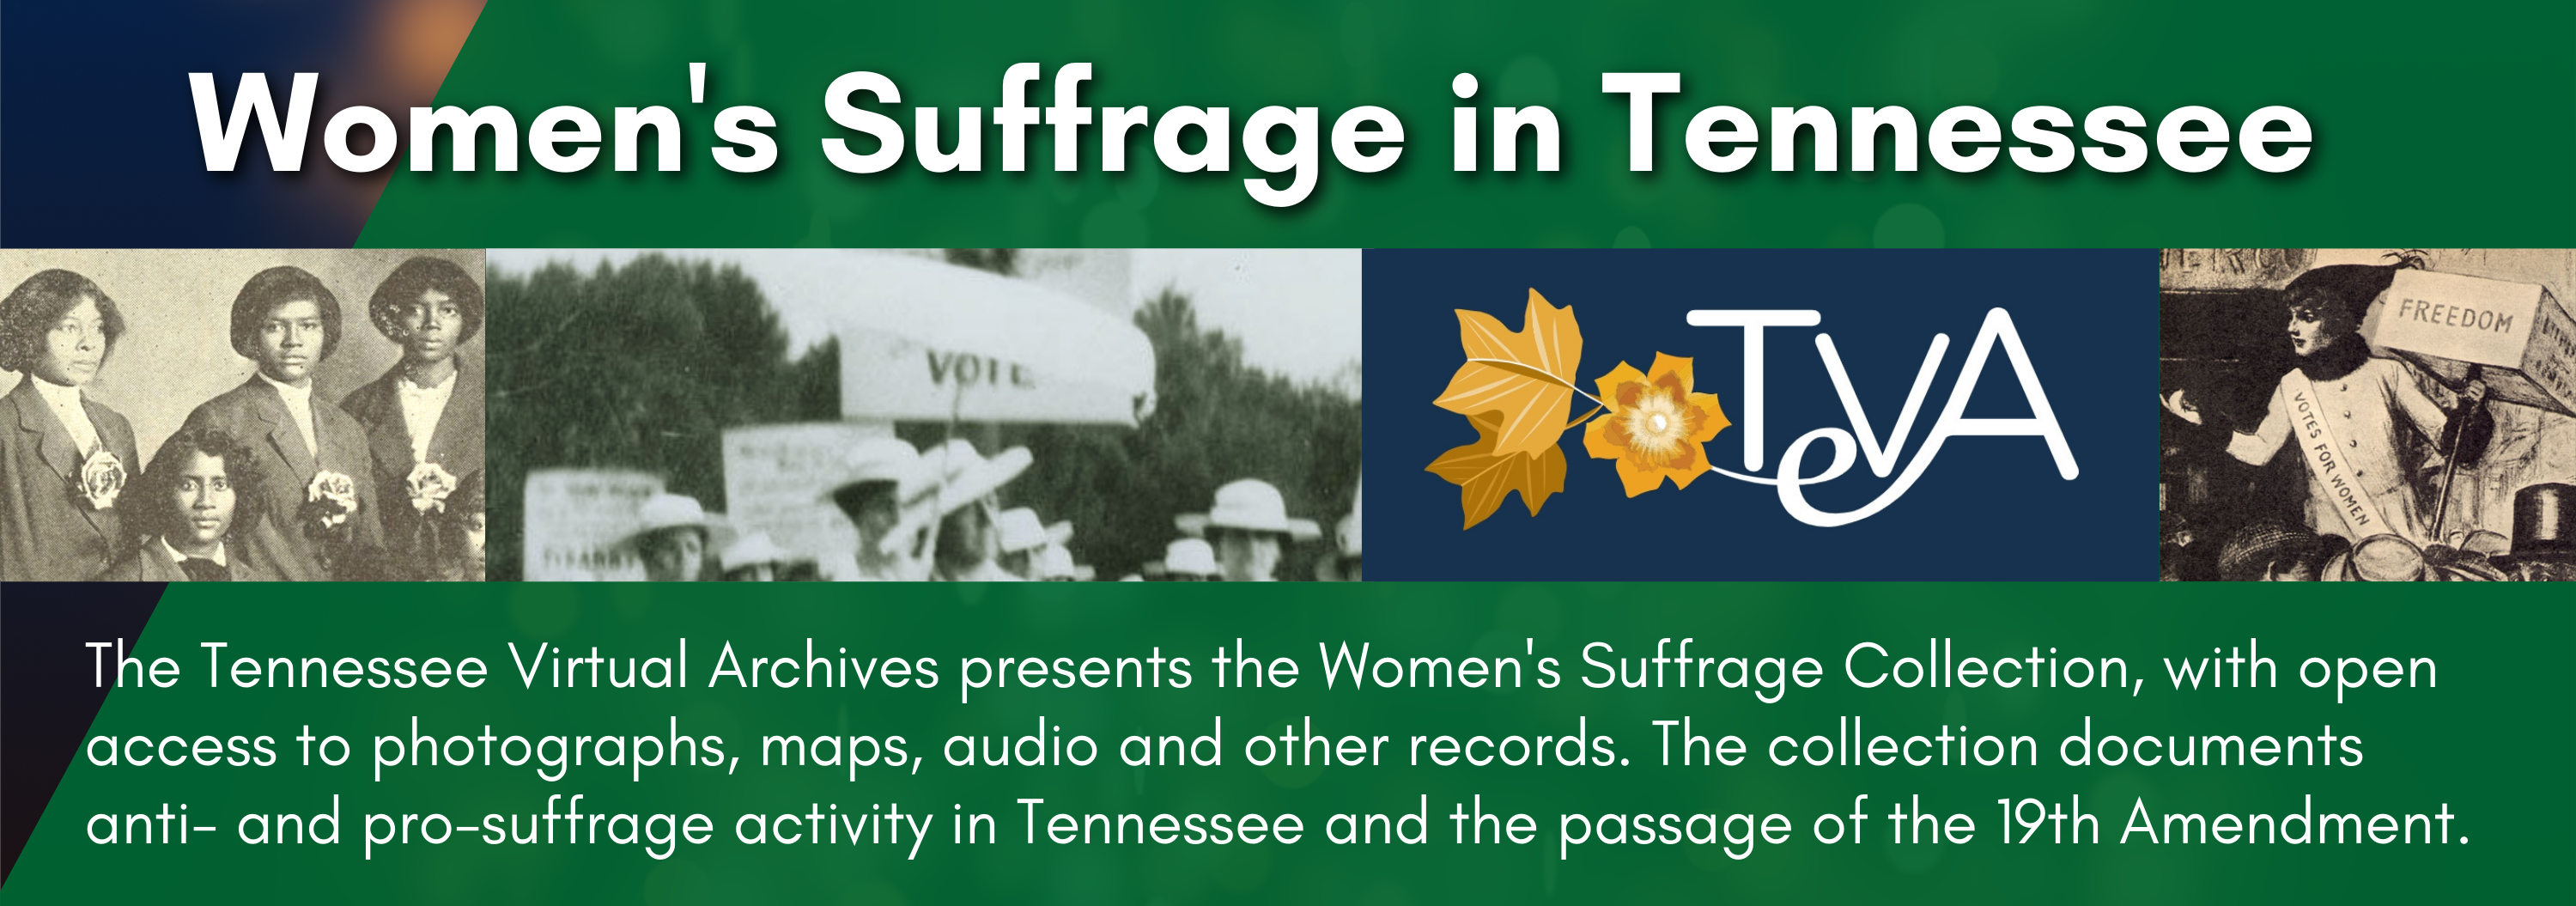 Women's Suffrage in Tennessee collection from TEVA